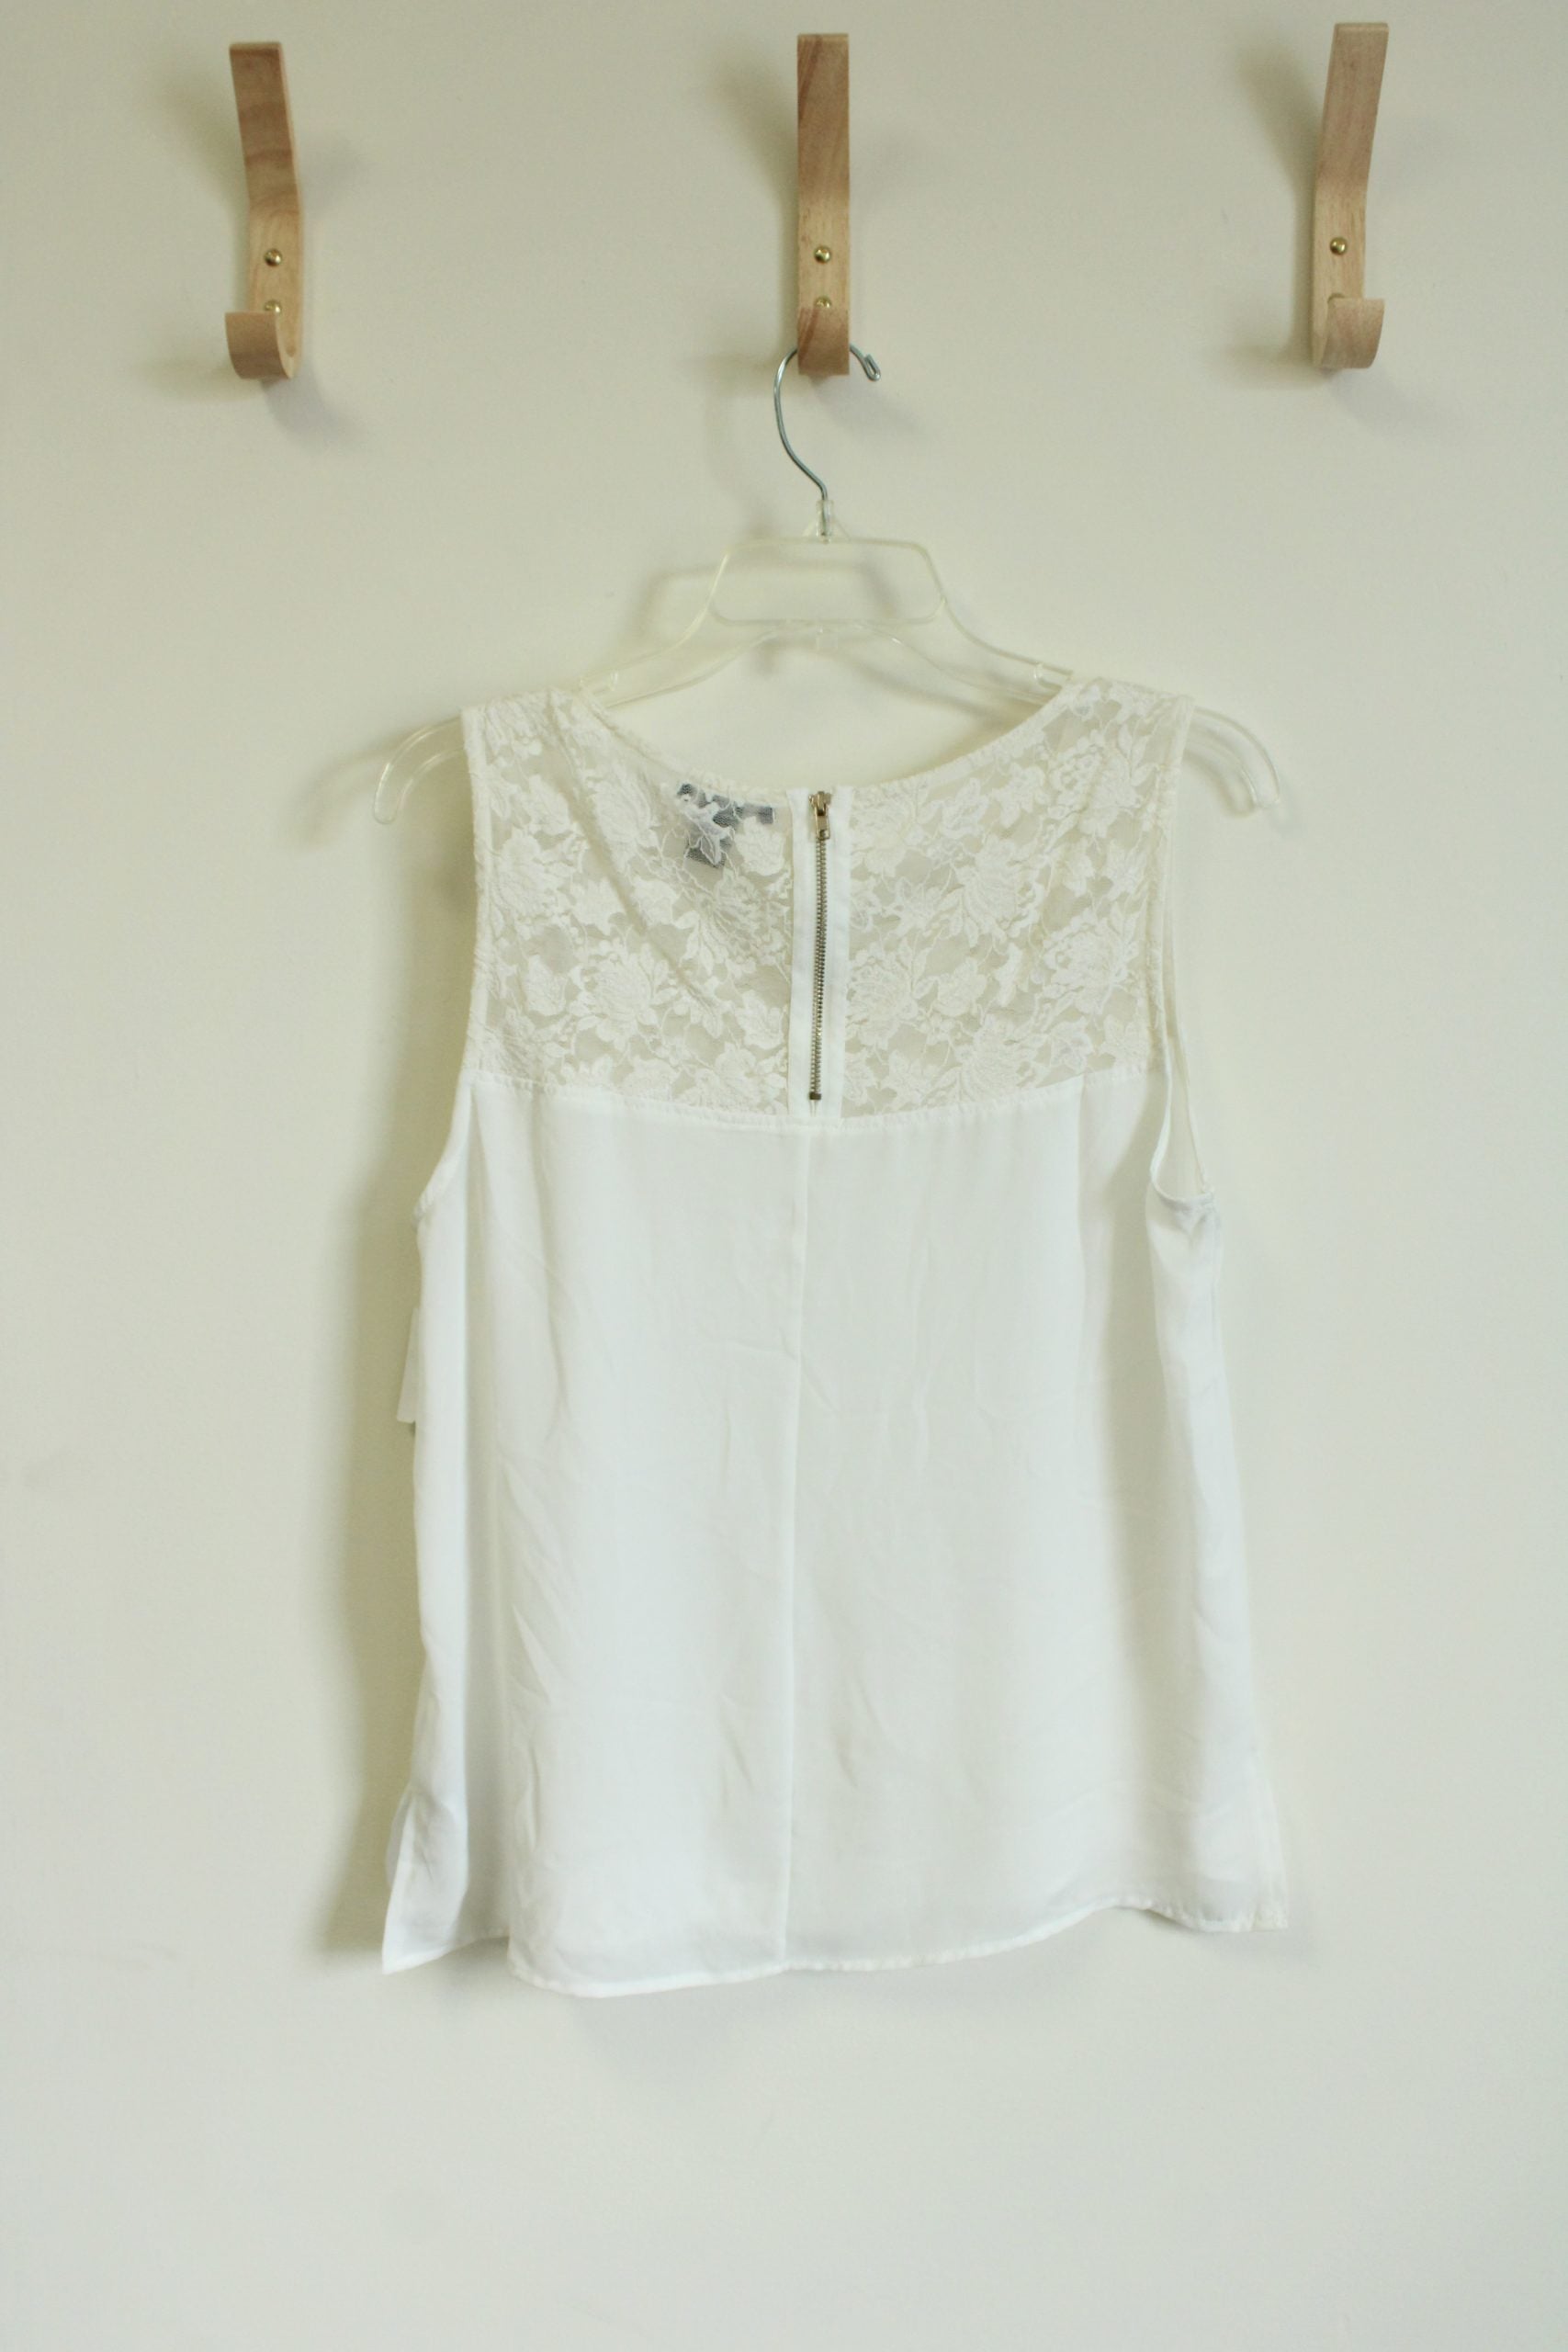 Forever 21 White Chiffon Lace Top | Size M